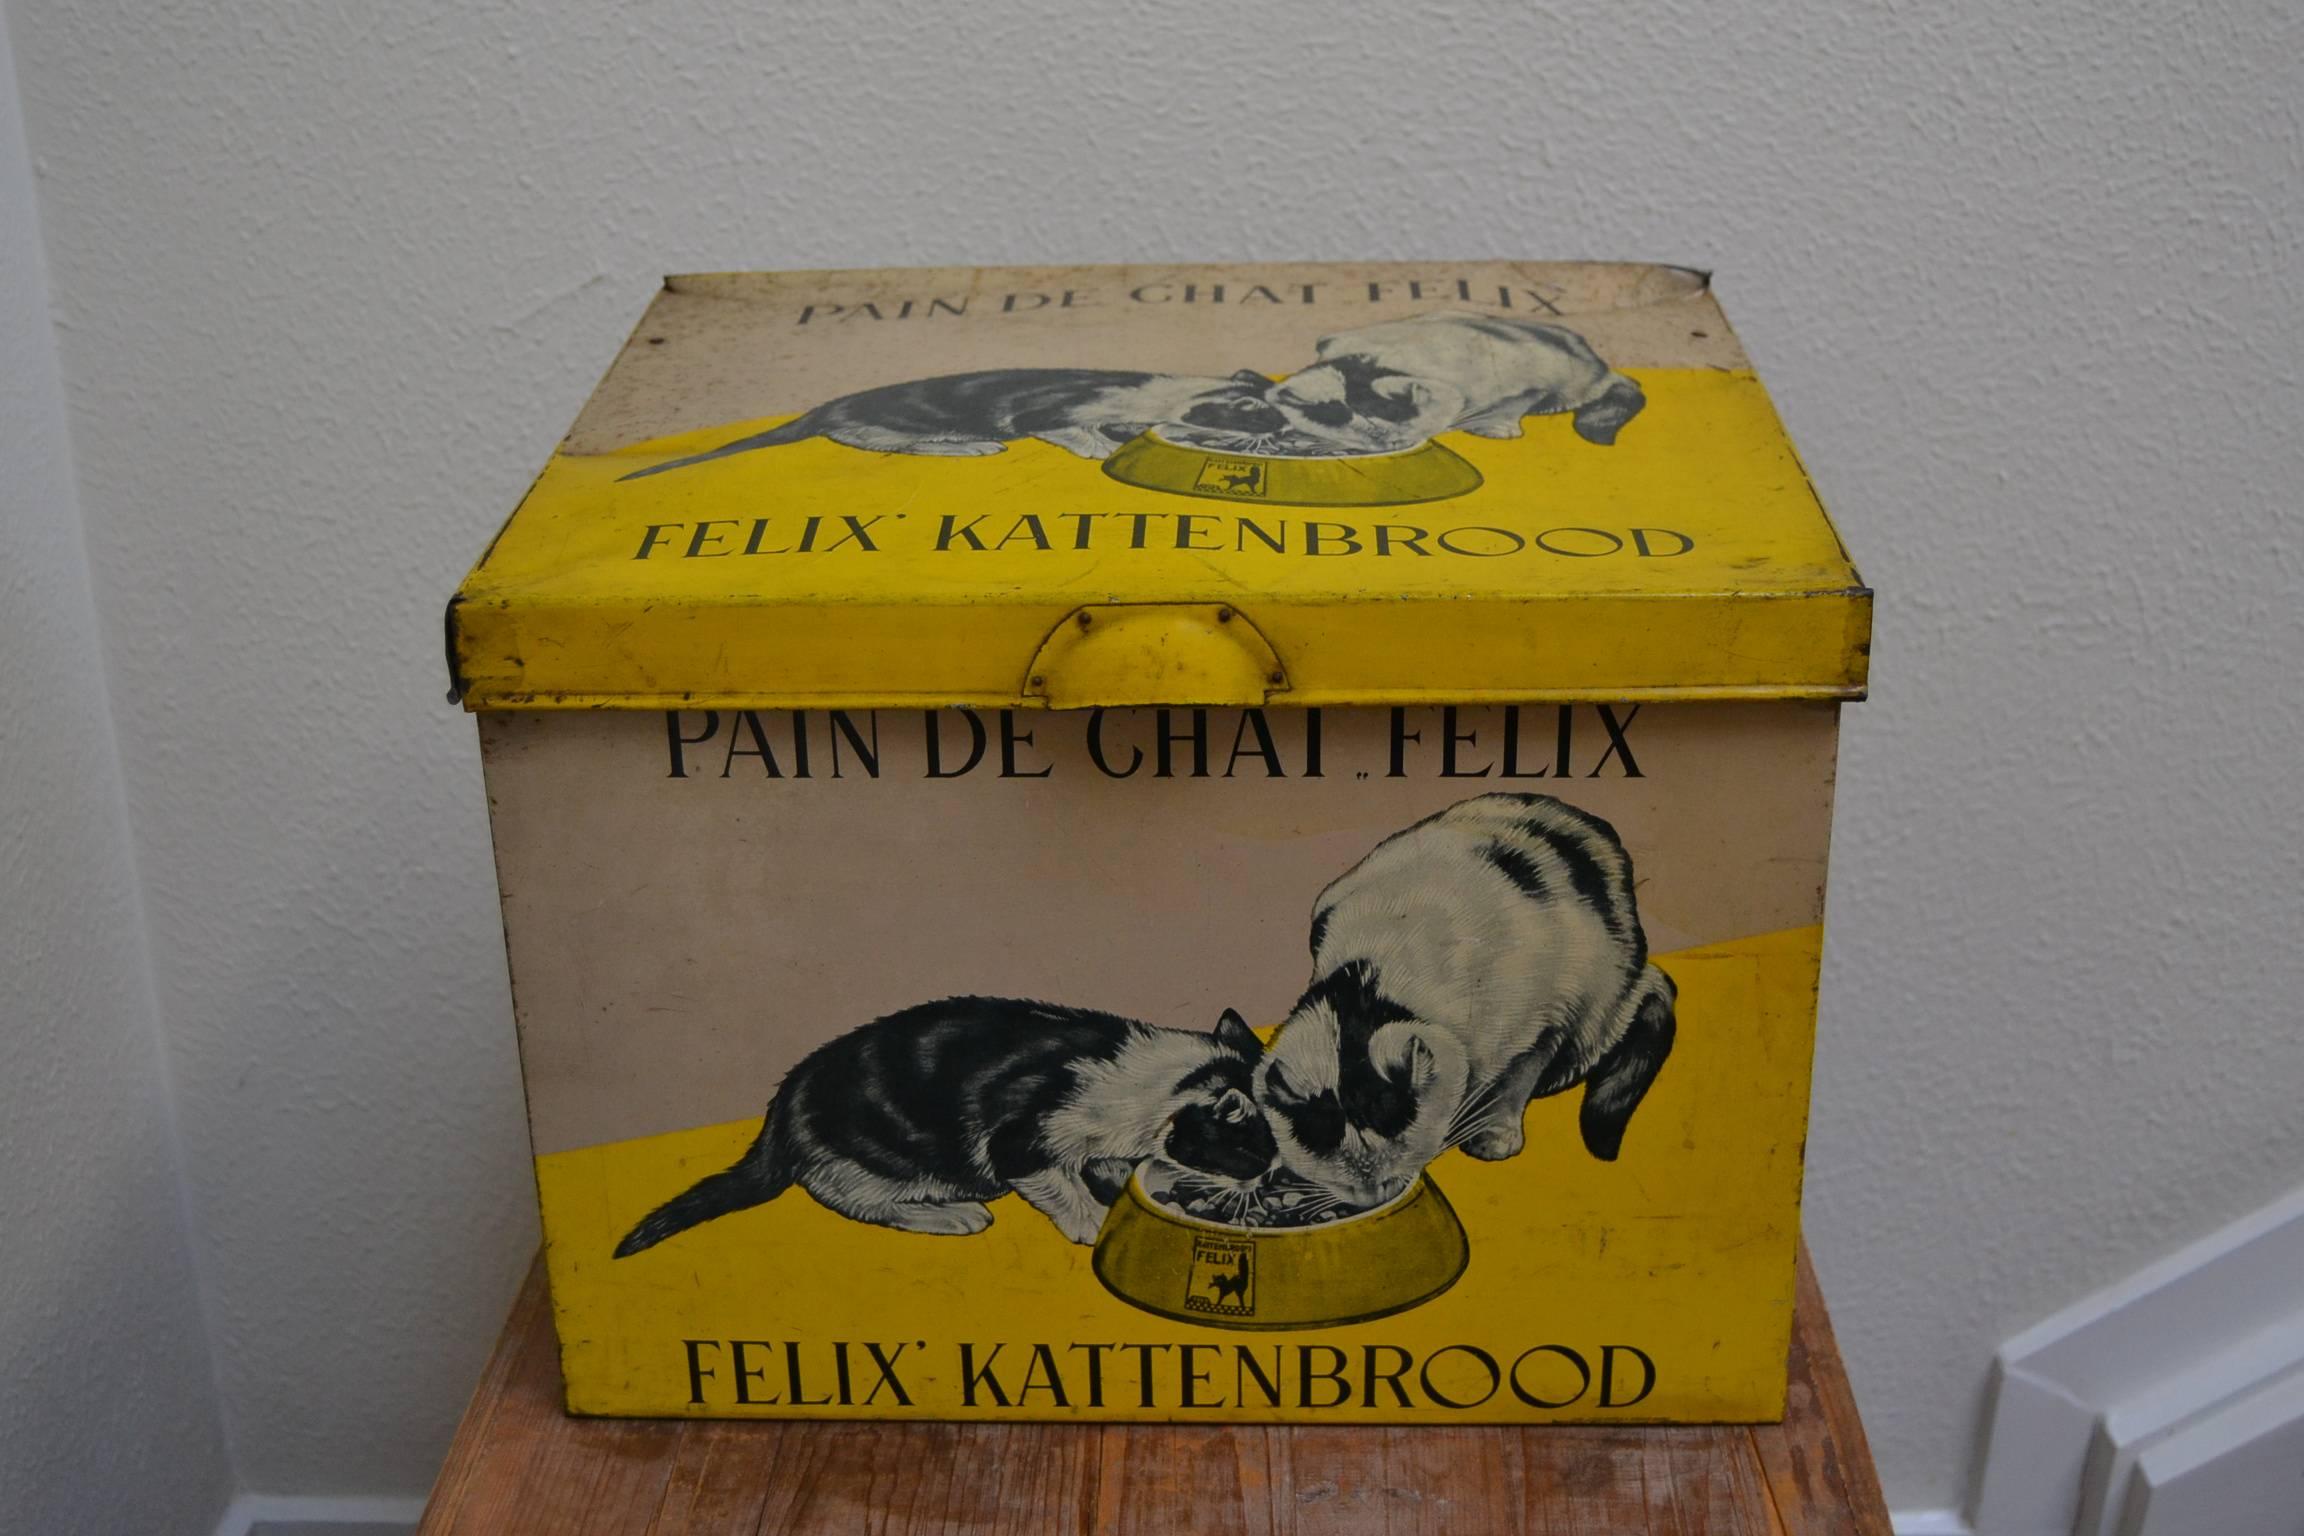 Very special rare antique tin box for cat food, circa 1940.
Felix Kattenbrood, Pain de Chat Felix, Cat Bread Felix.
Awesome lithographic yellow tin box with beautiful designs of cats.
This vintage tin will go certainly to a cat lover. 

The